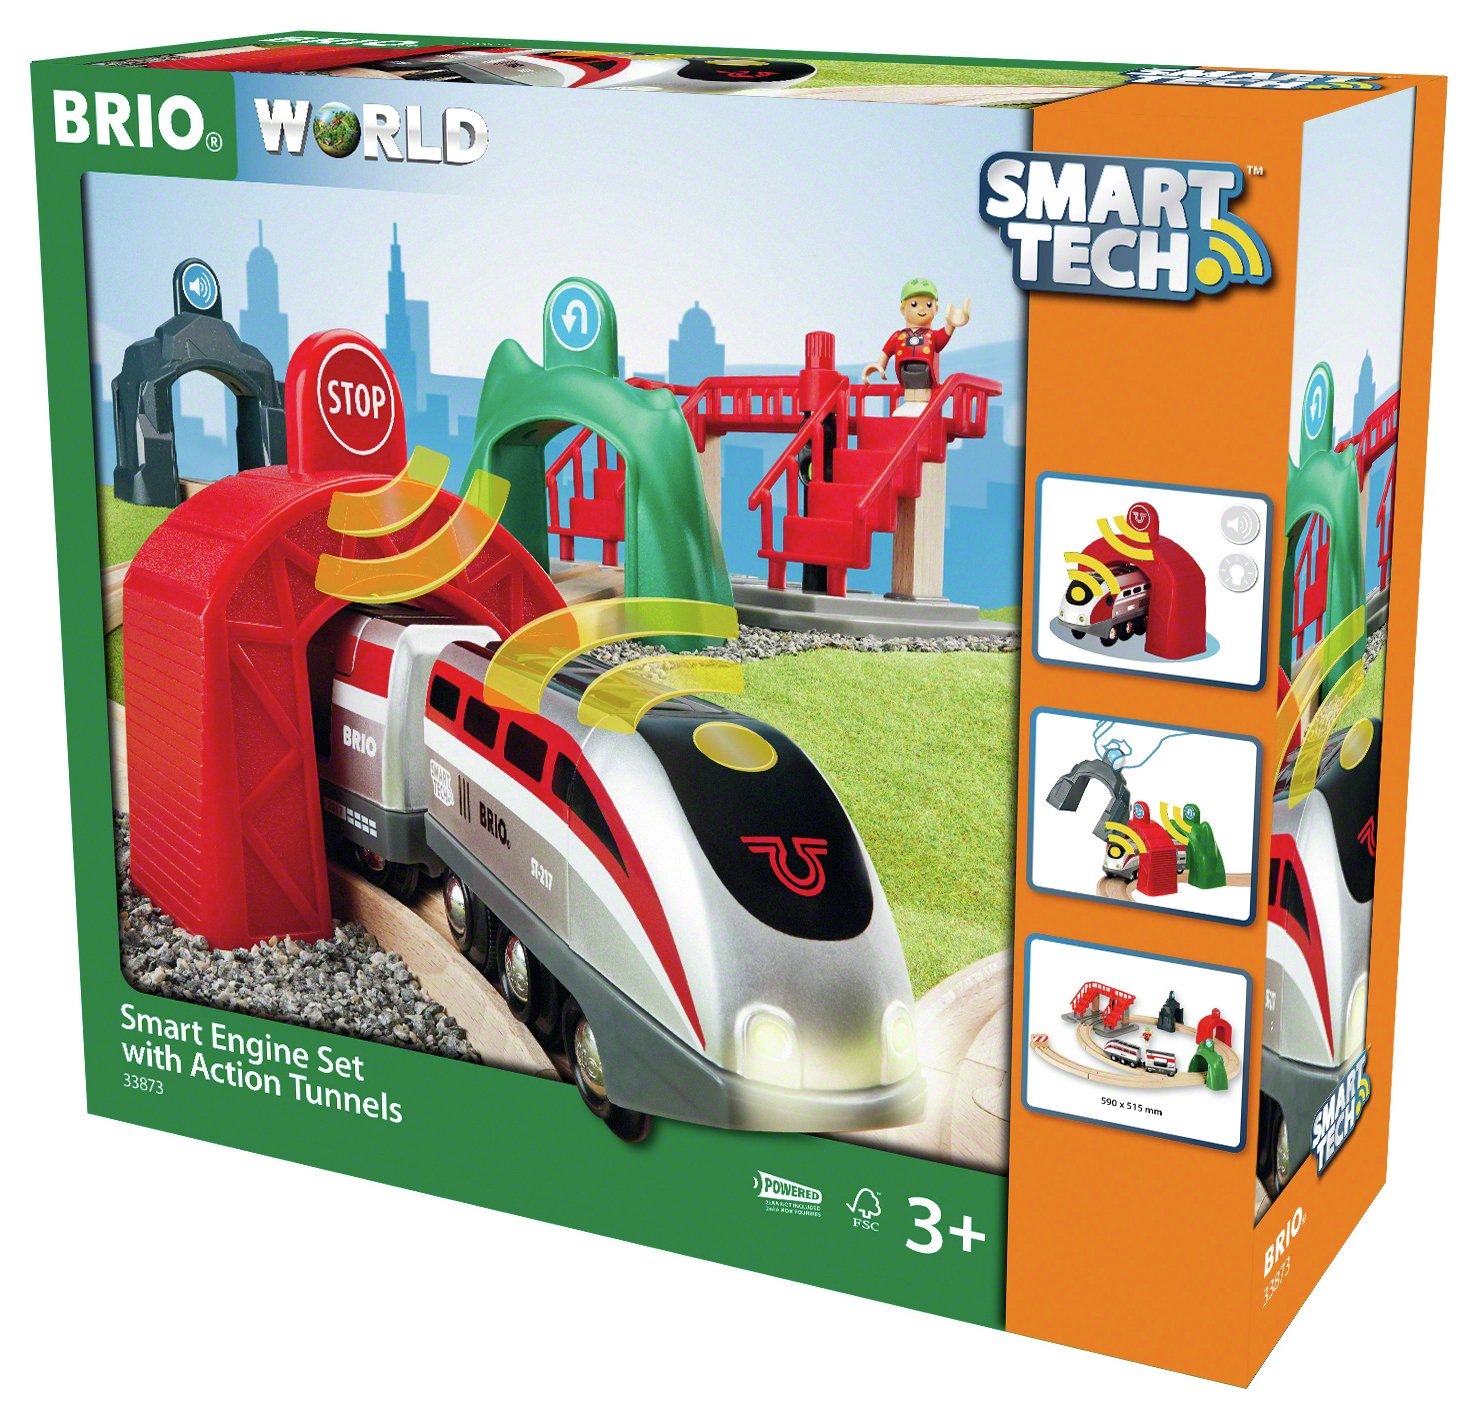 BRIO World Smart Tech Engine Set with Action Tunnels